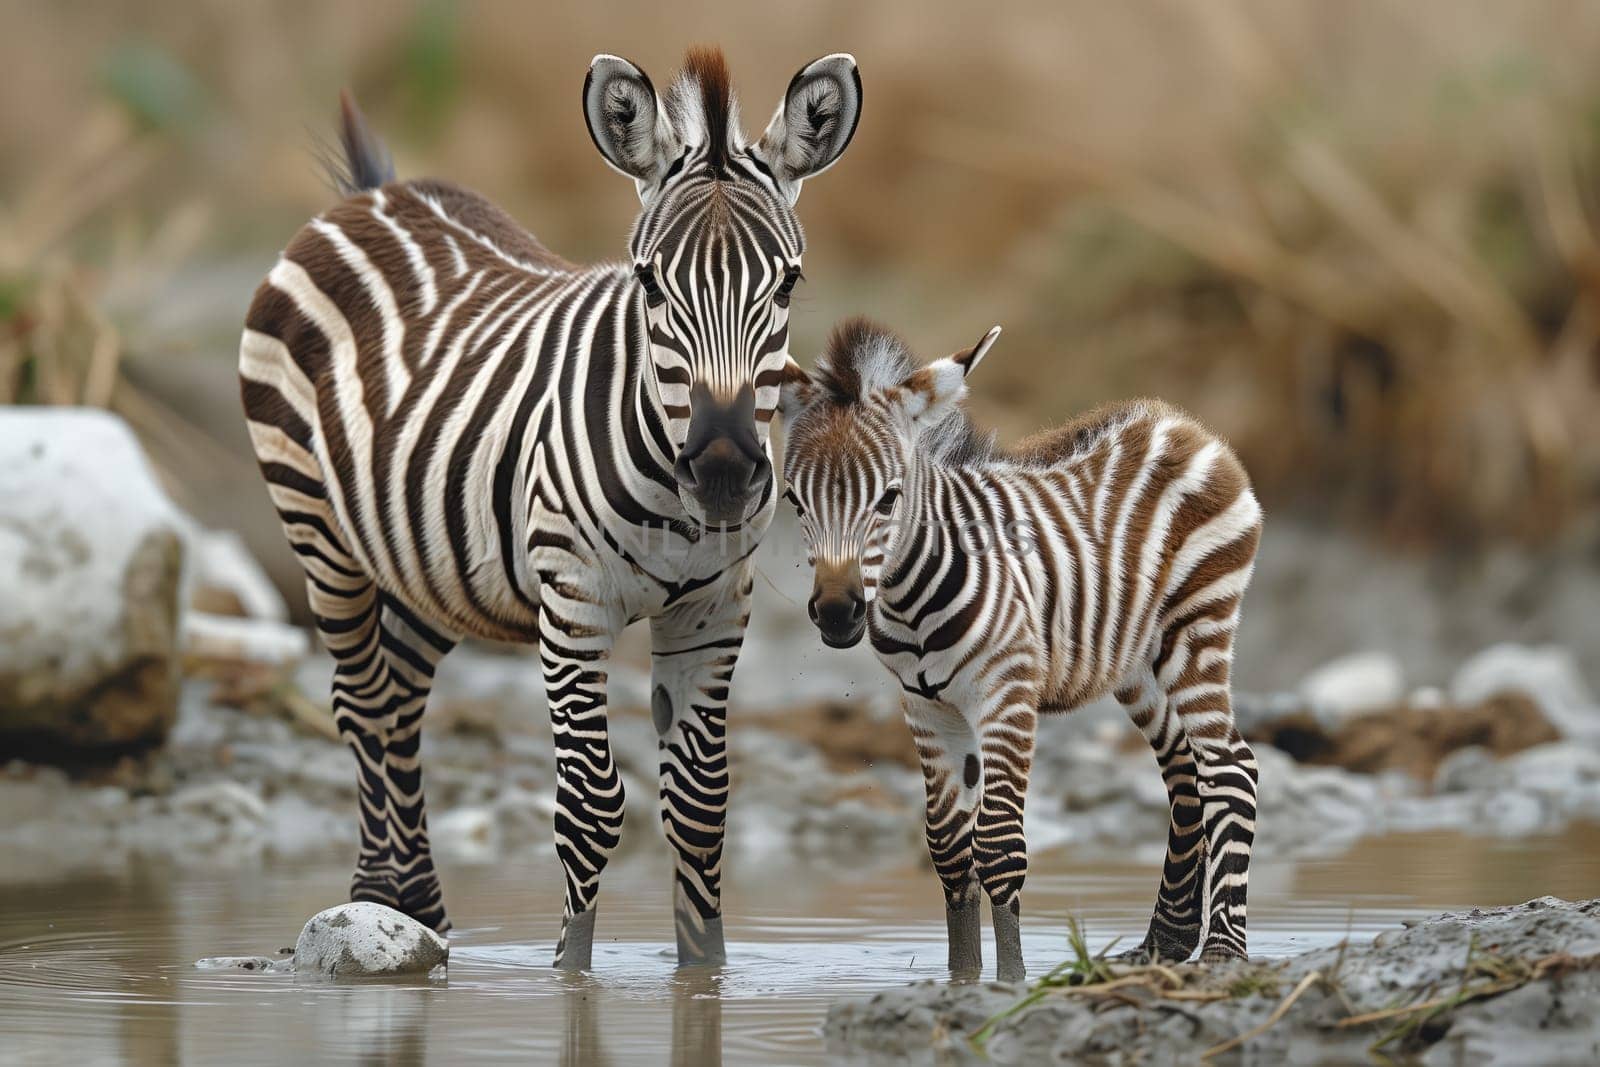 Two zebras standing together in the water, a natural landscape scene by richwolf